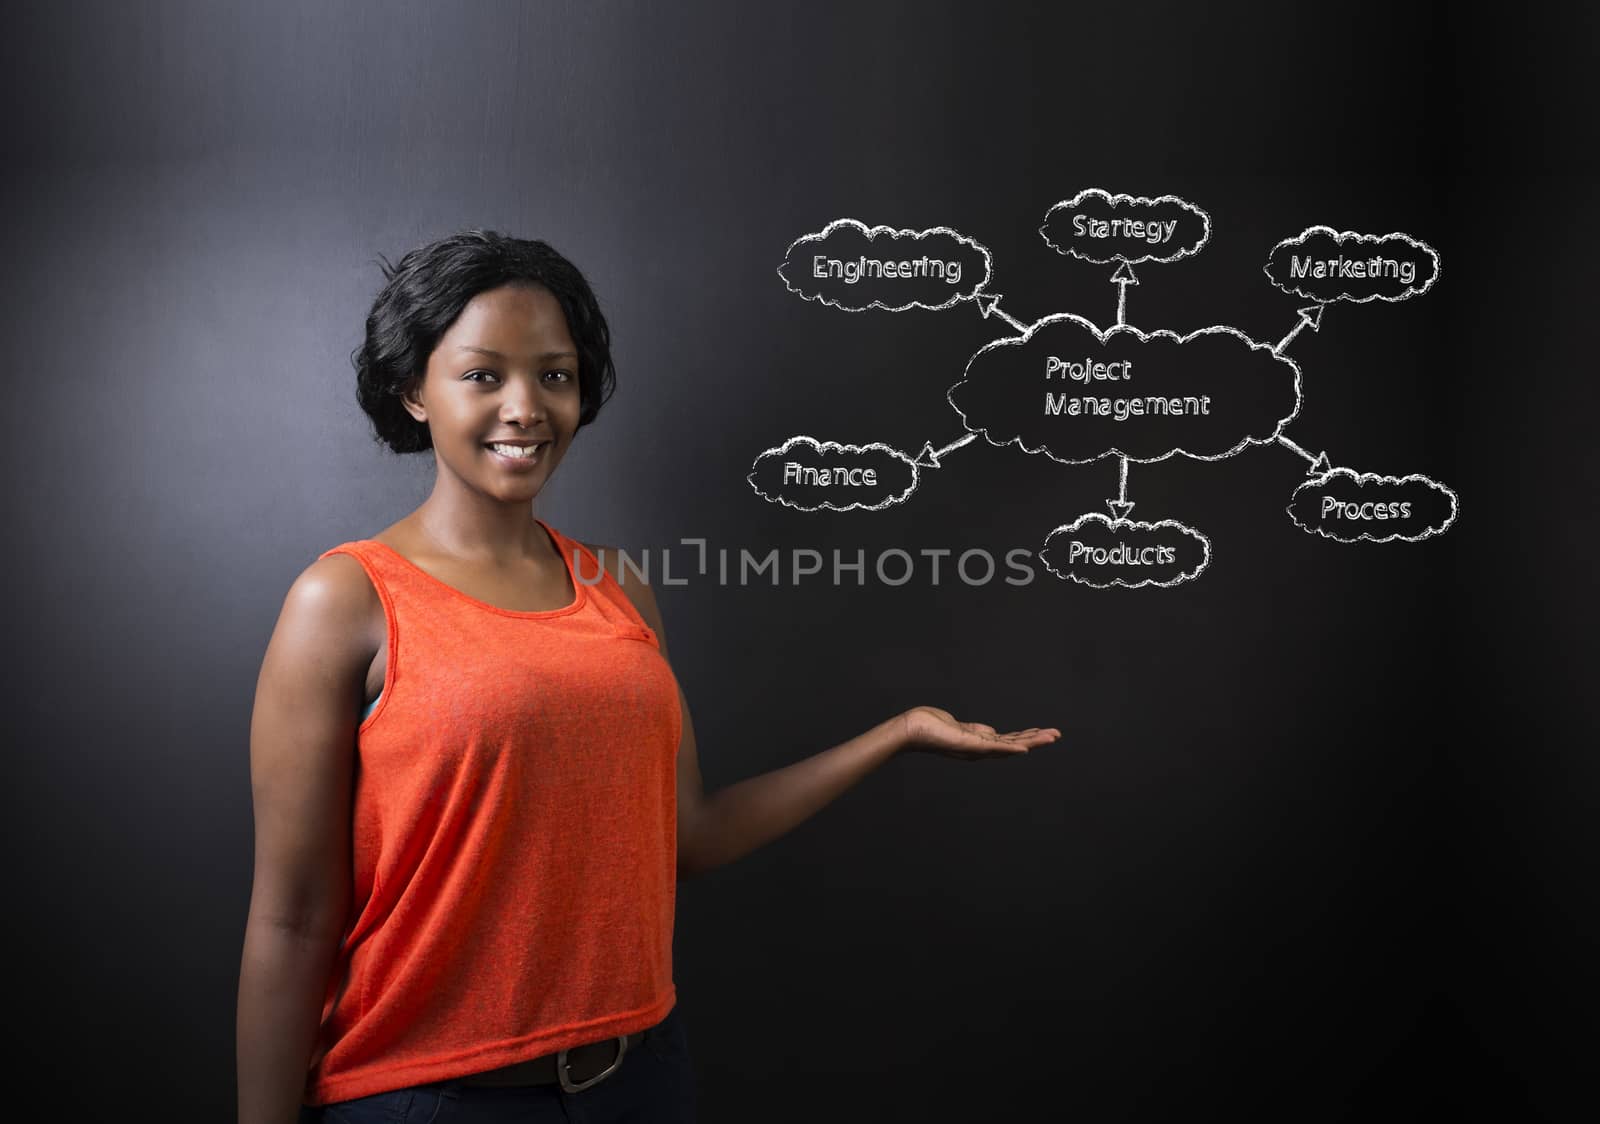 South African or African American woman teacher or student holding hand out against a blackboard background with a chalk project management diagram